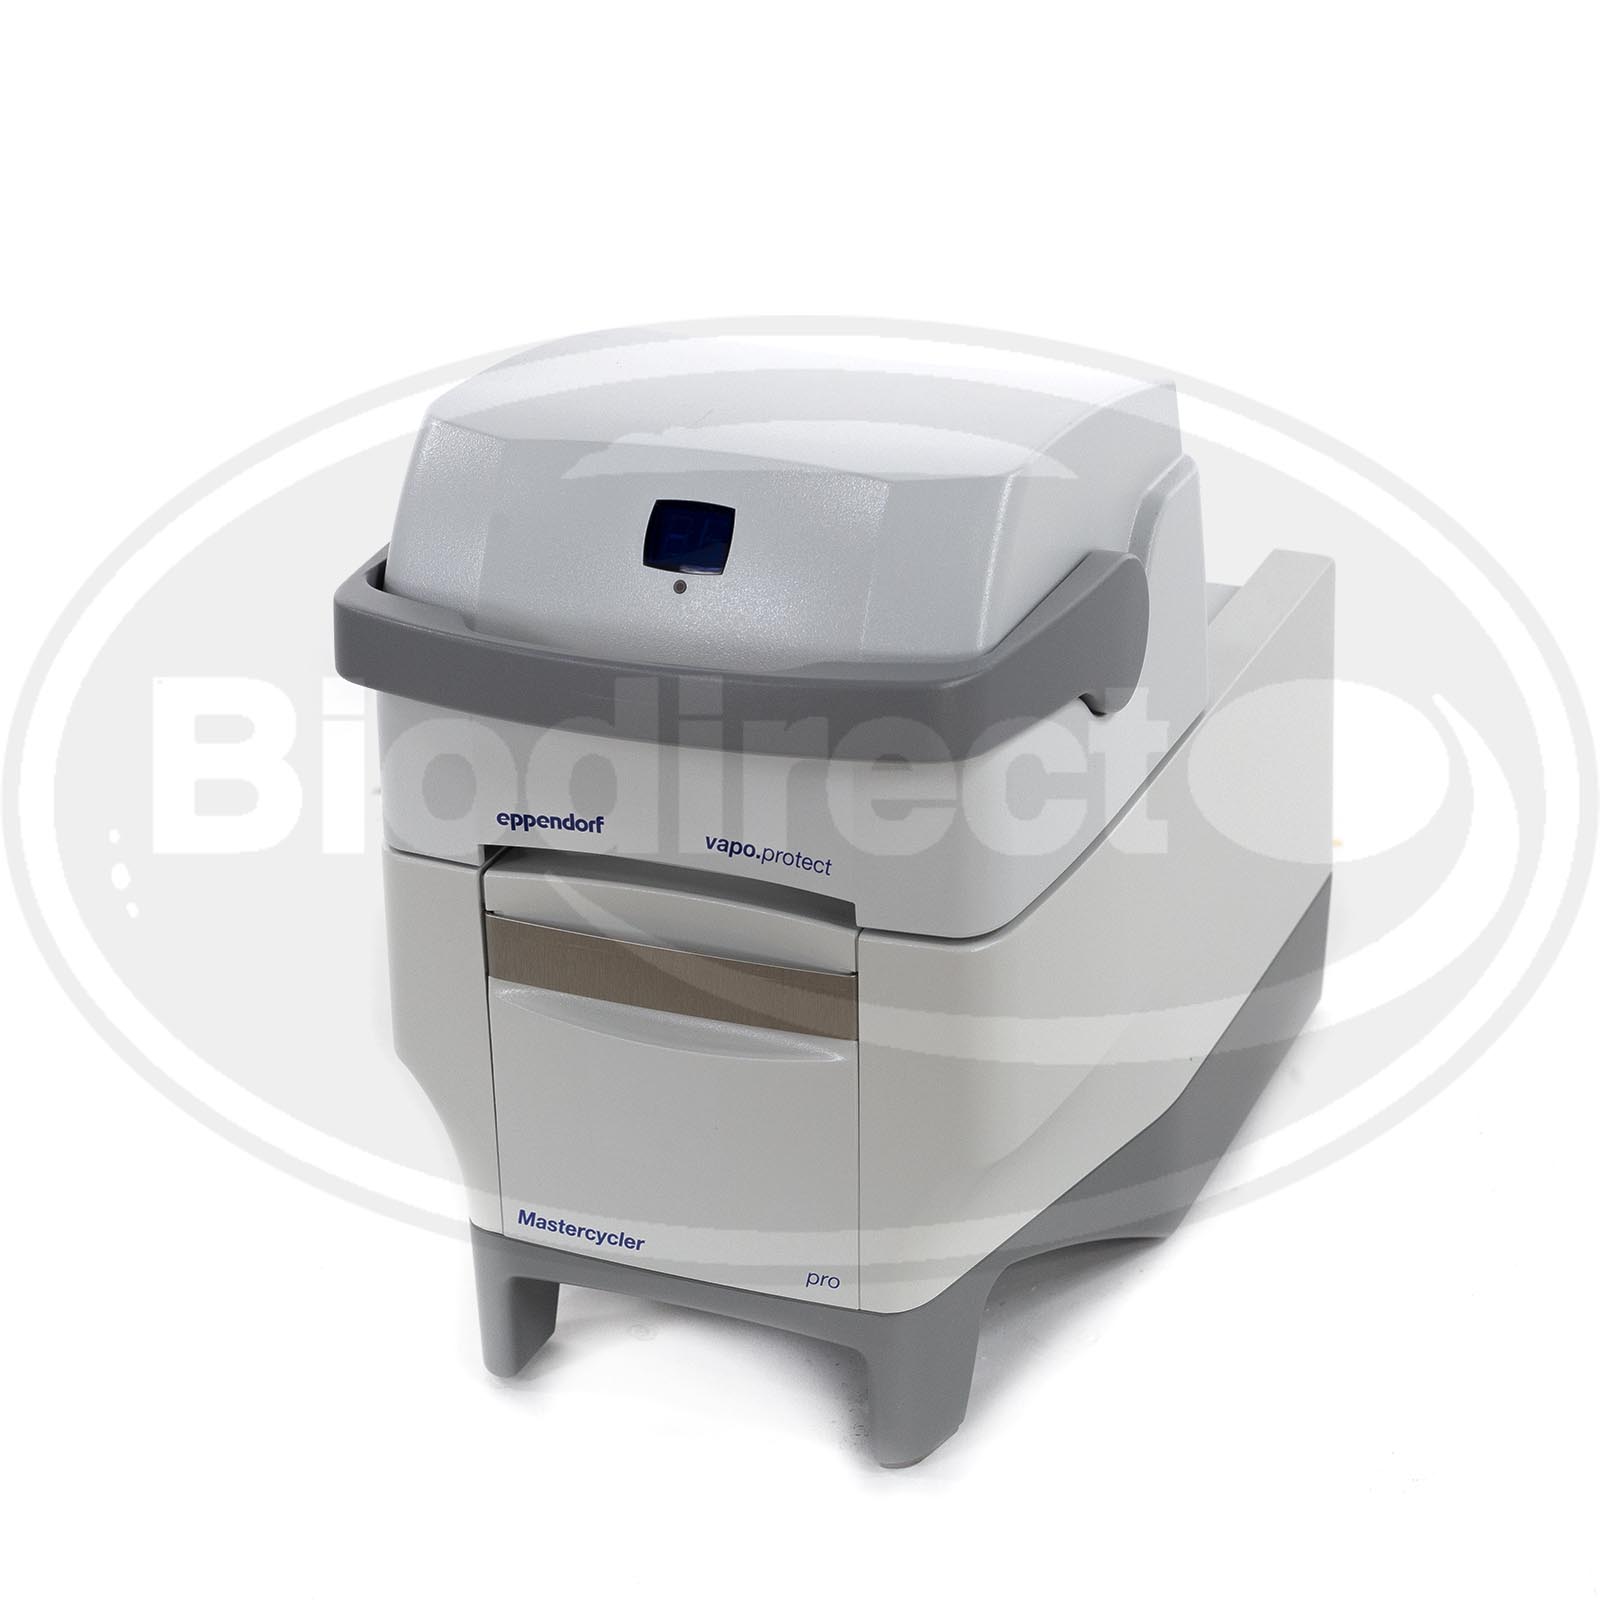 Eppendorf Thermal Cycler Mastercycler Pro Vapo Protect 96